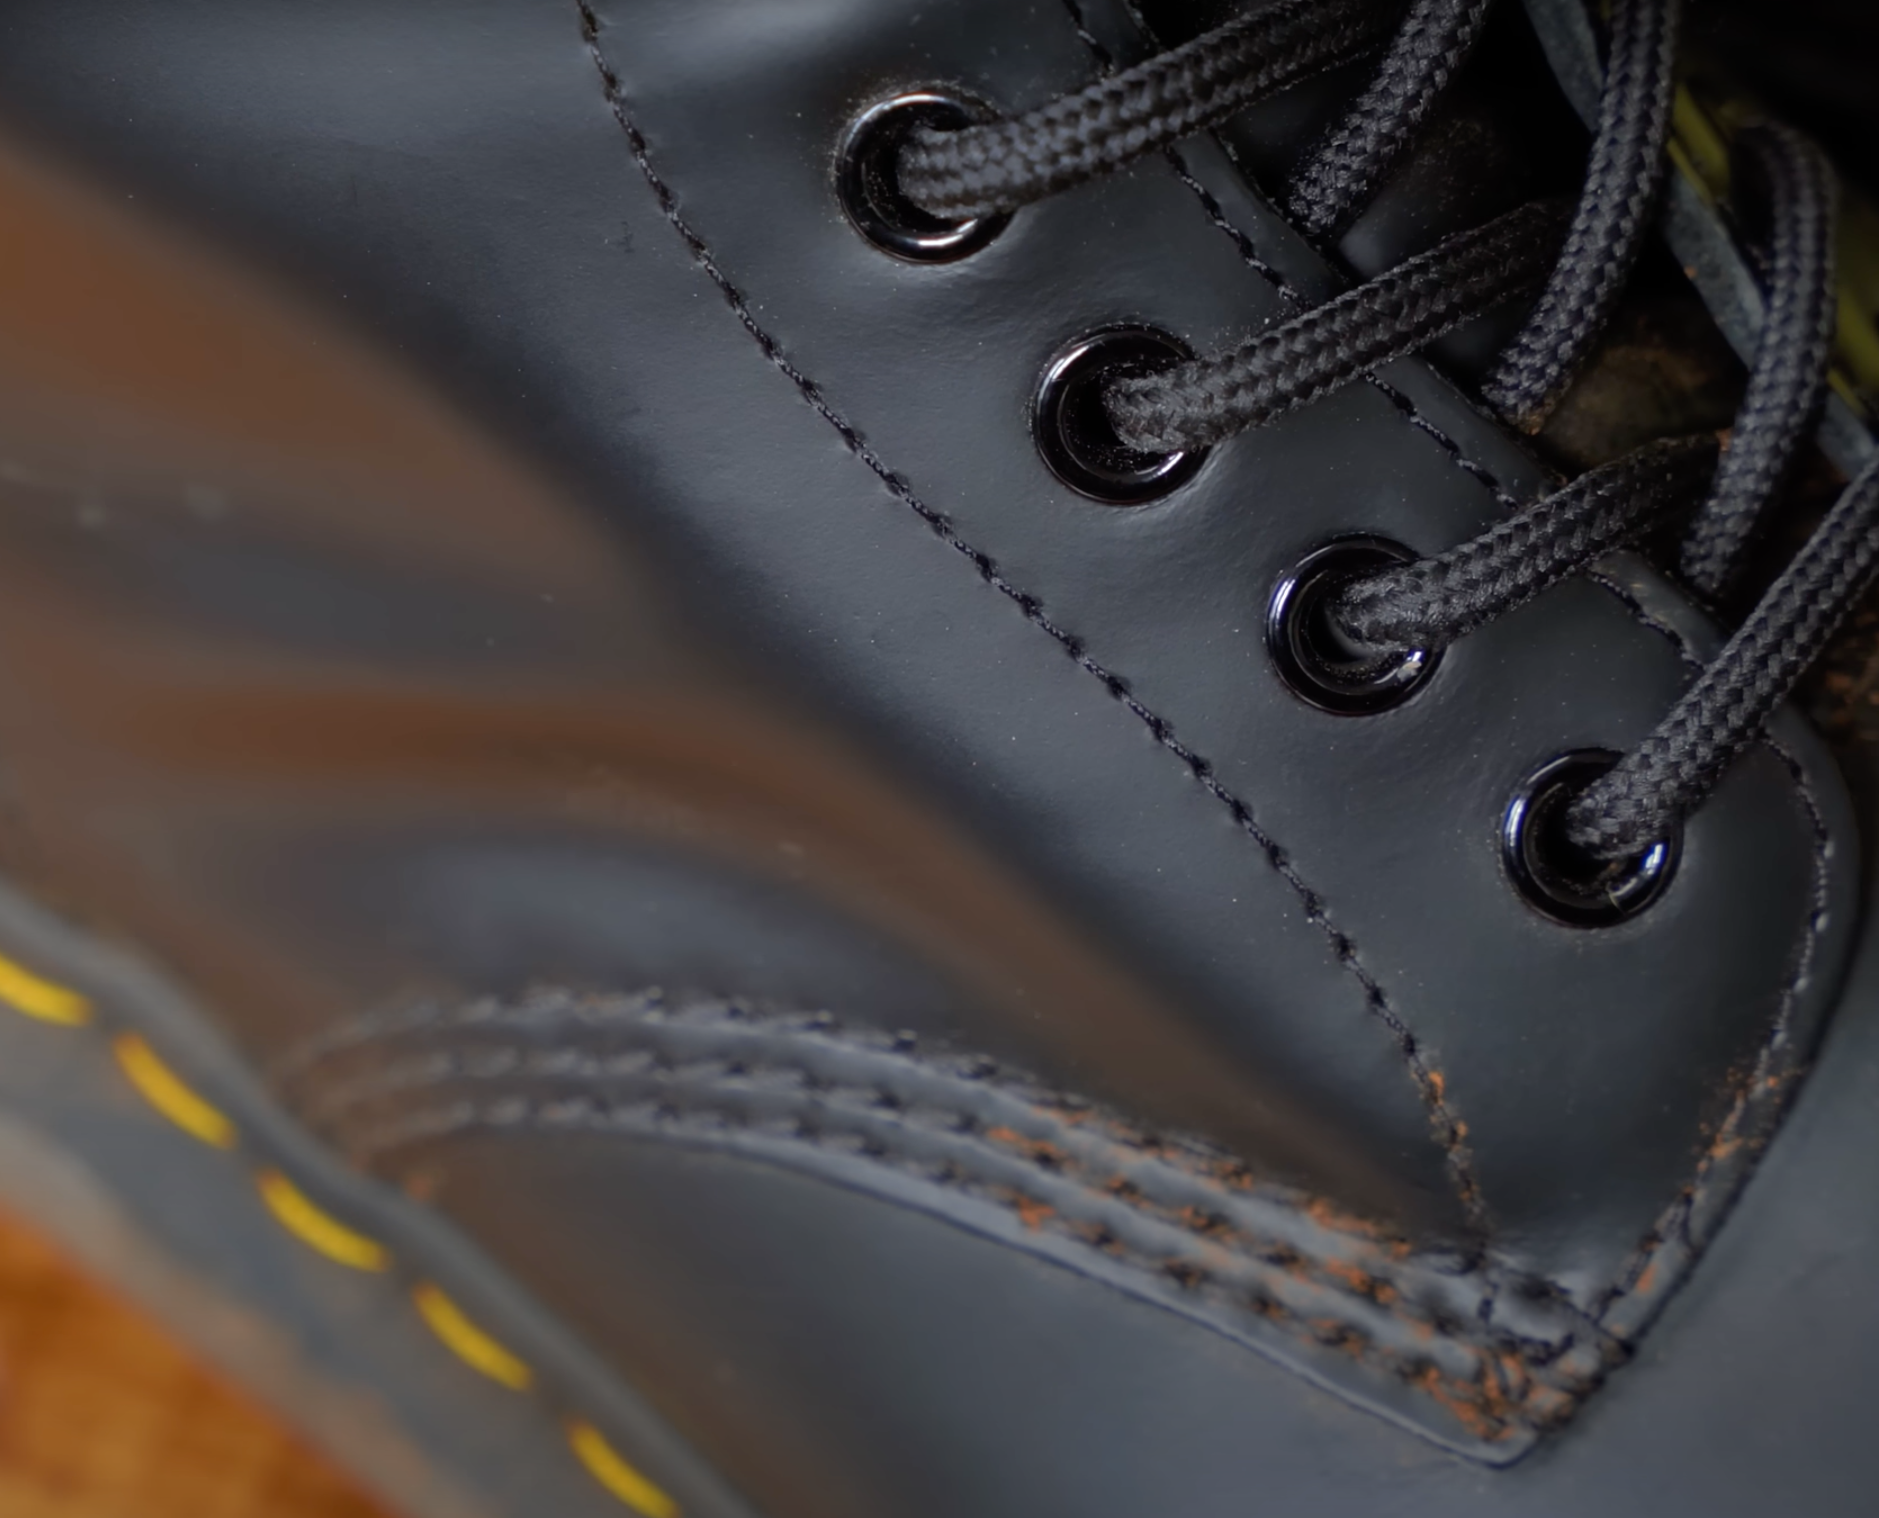 Dr. Martens 1460 Black Leather Boots close up of laces